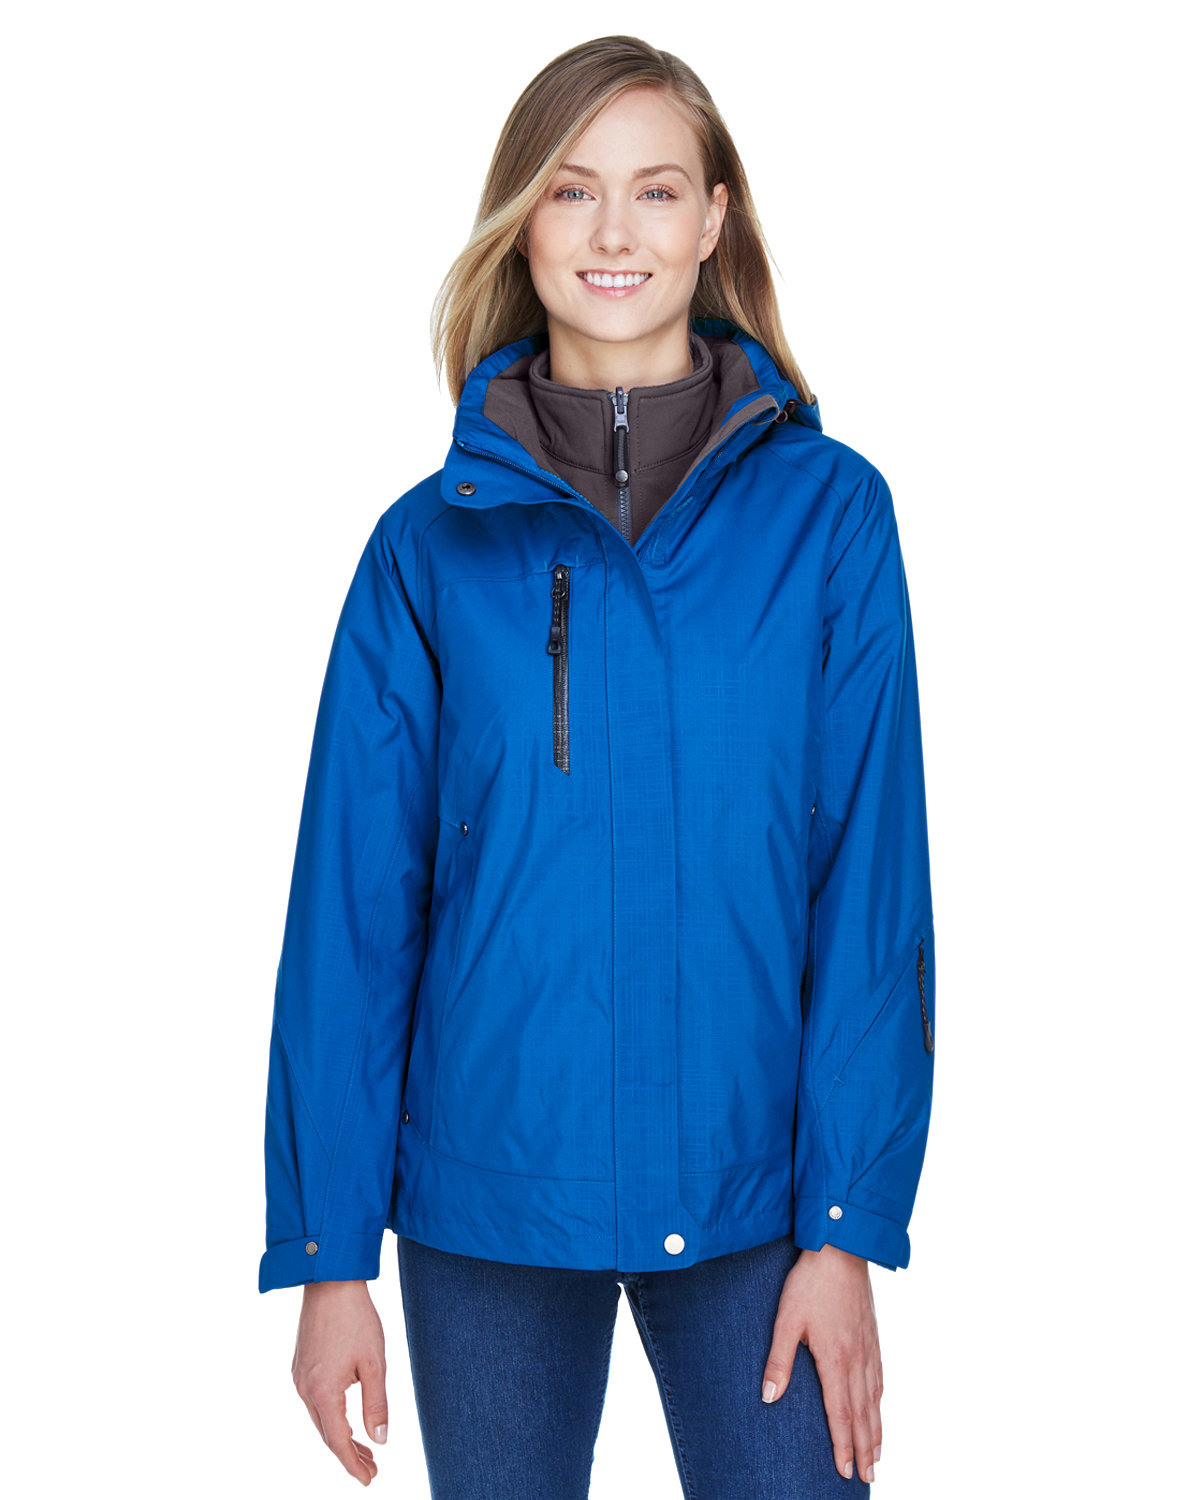 North End 78178 - Ladies' Caprice 3-in-1 Jacket with Soft Shell Liner